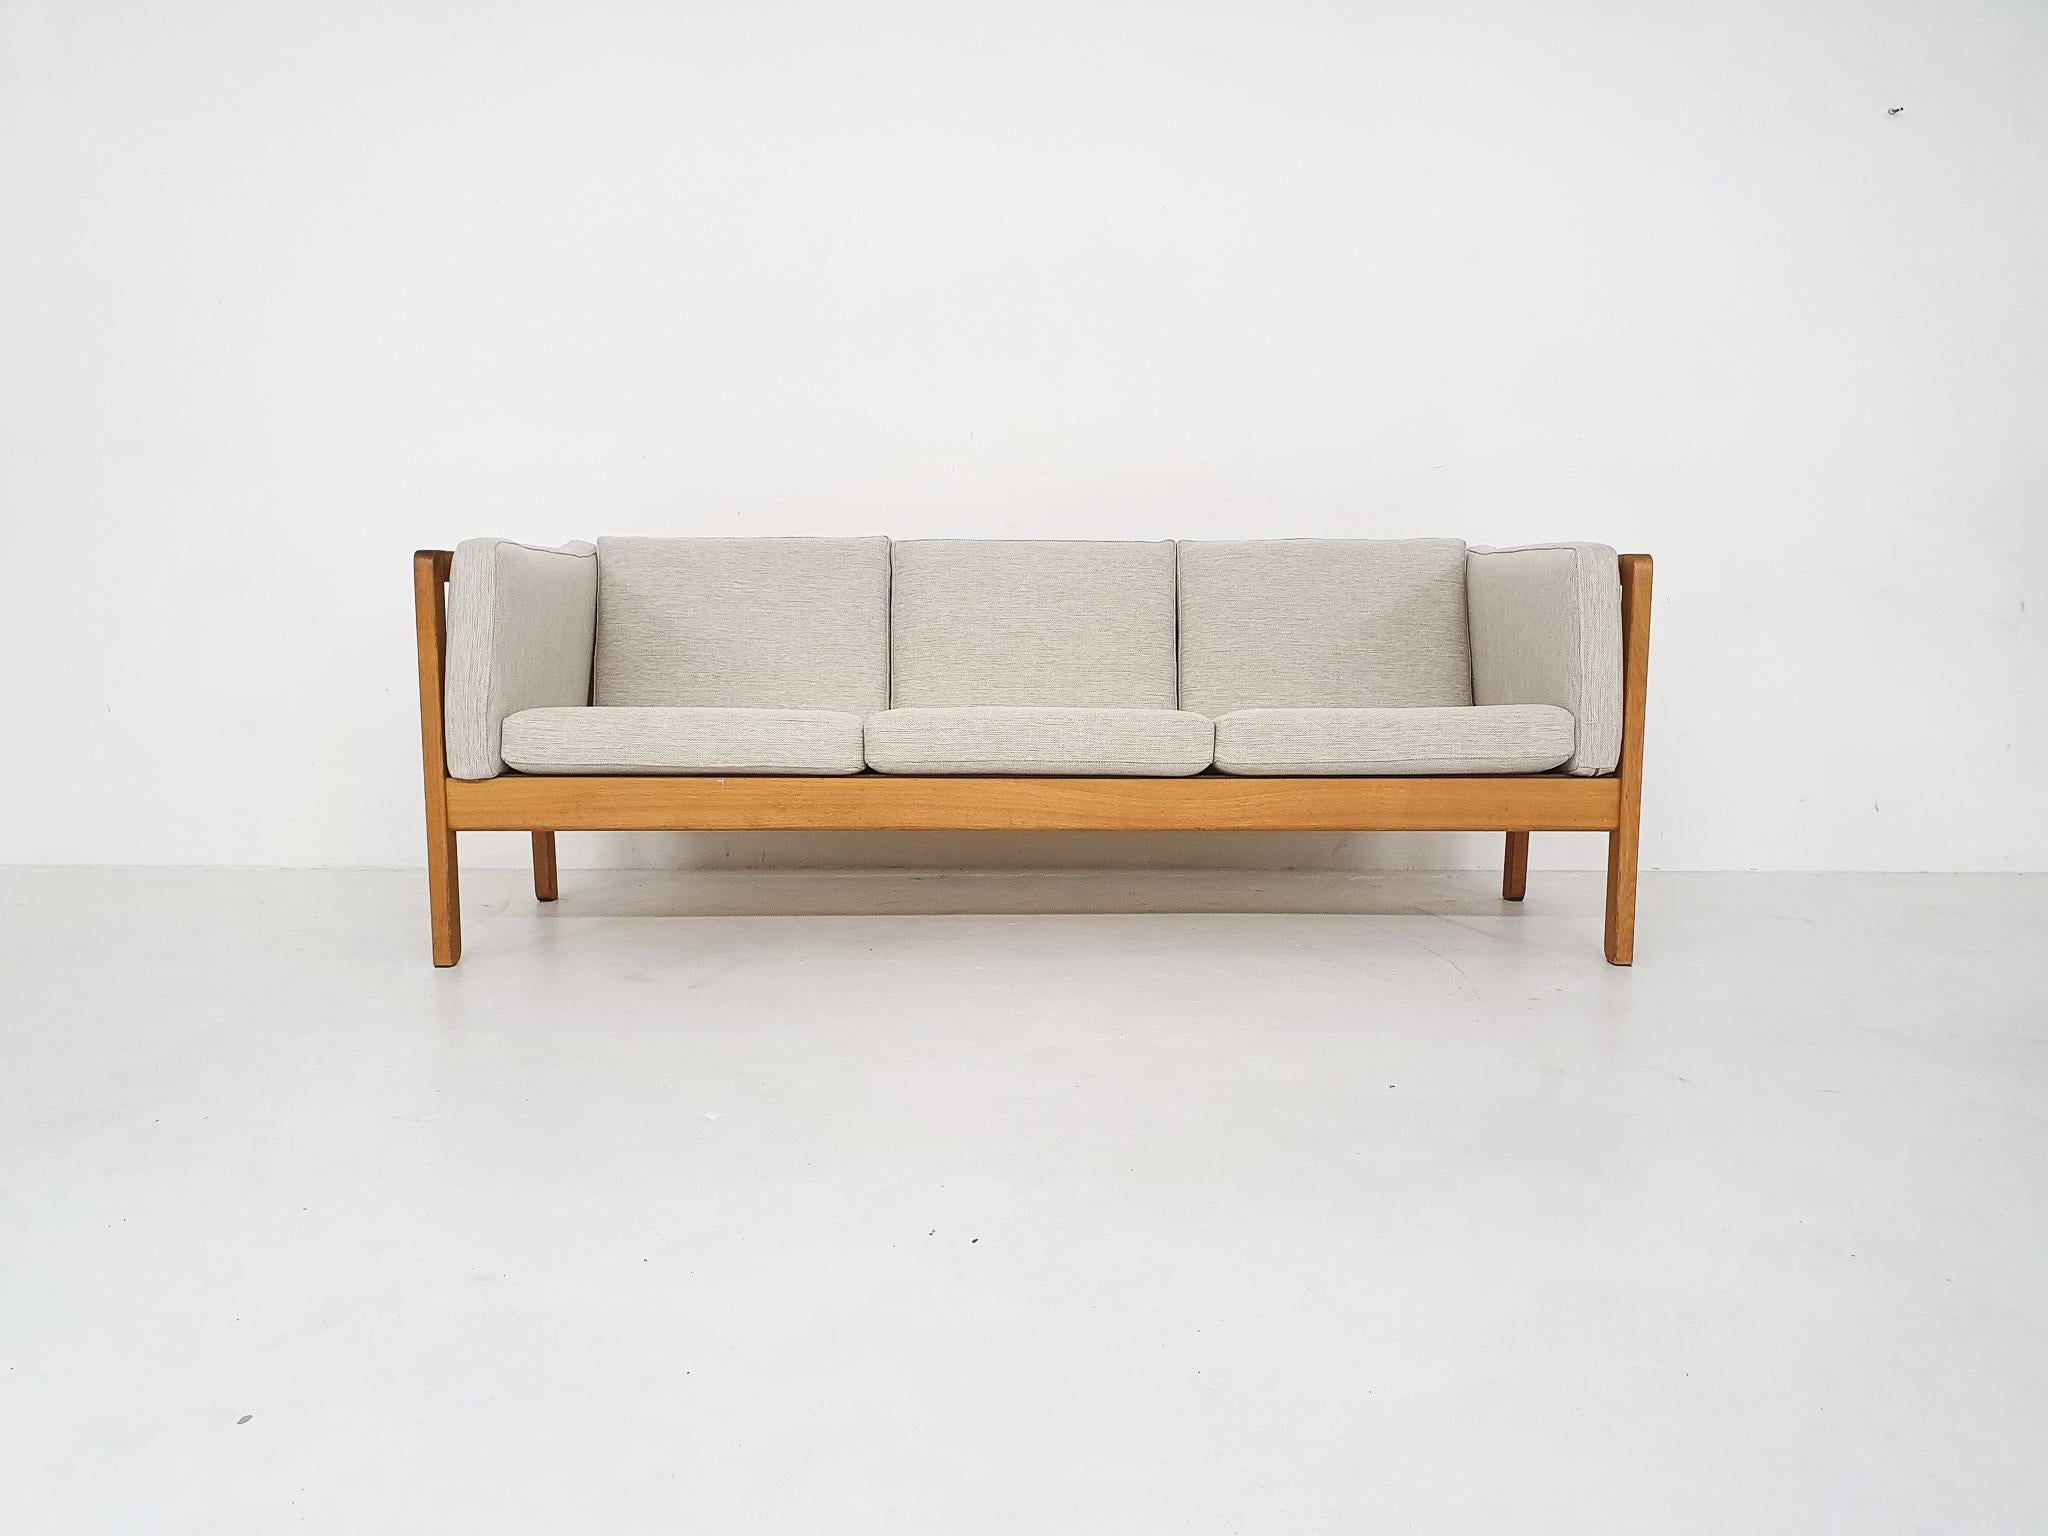 Light oak sofa with beige cushions. We re-upholstered the cushions in a fabric which can be used indoor or outdoor.
The design reminds us of the H680 sofa of Bernt Petersen or a design by Børge Mogensen or Hans Wegner.
The price is for the 3-seat